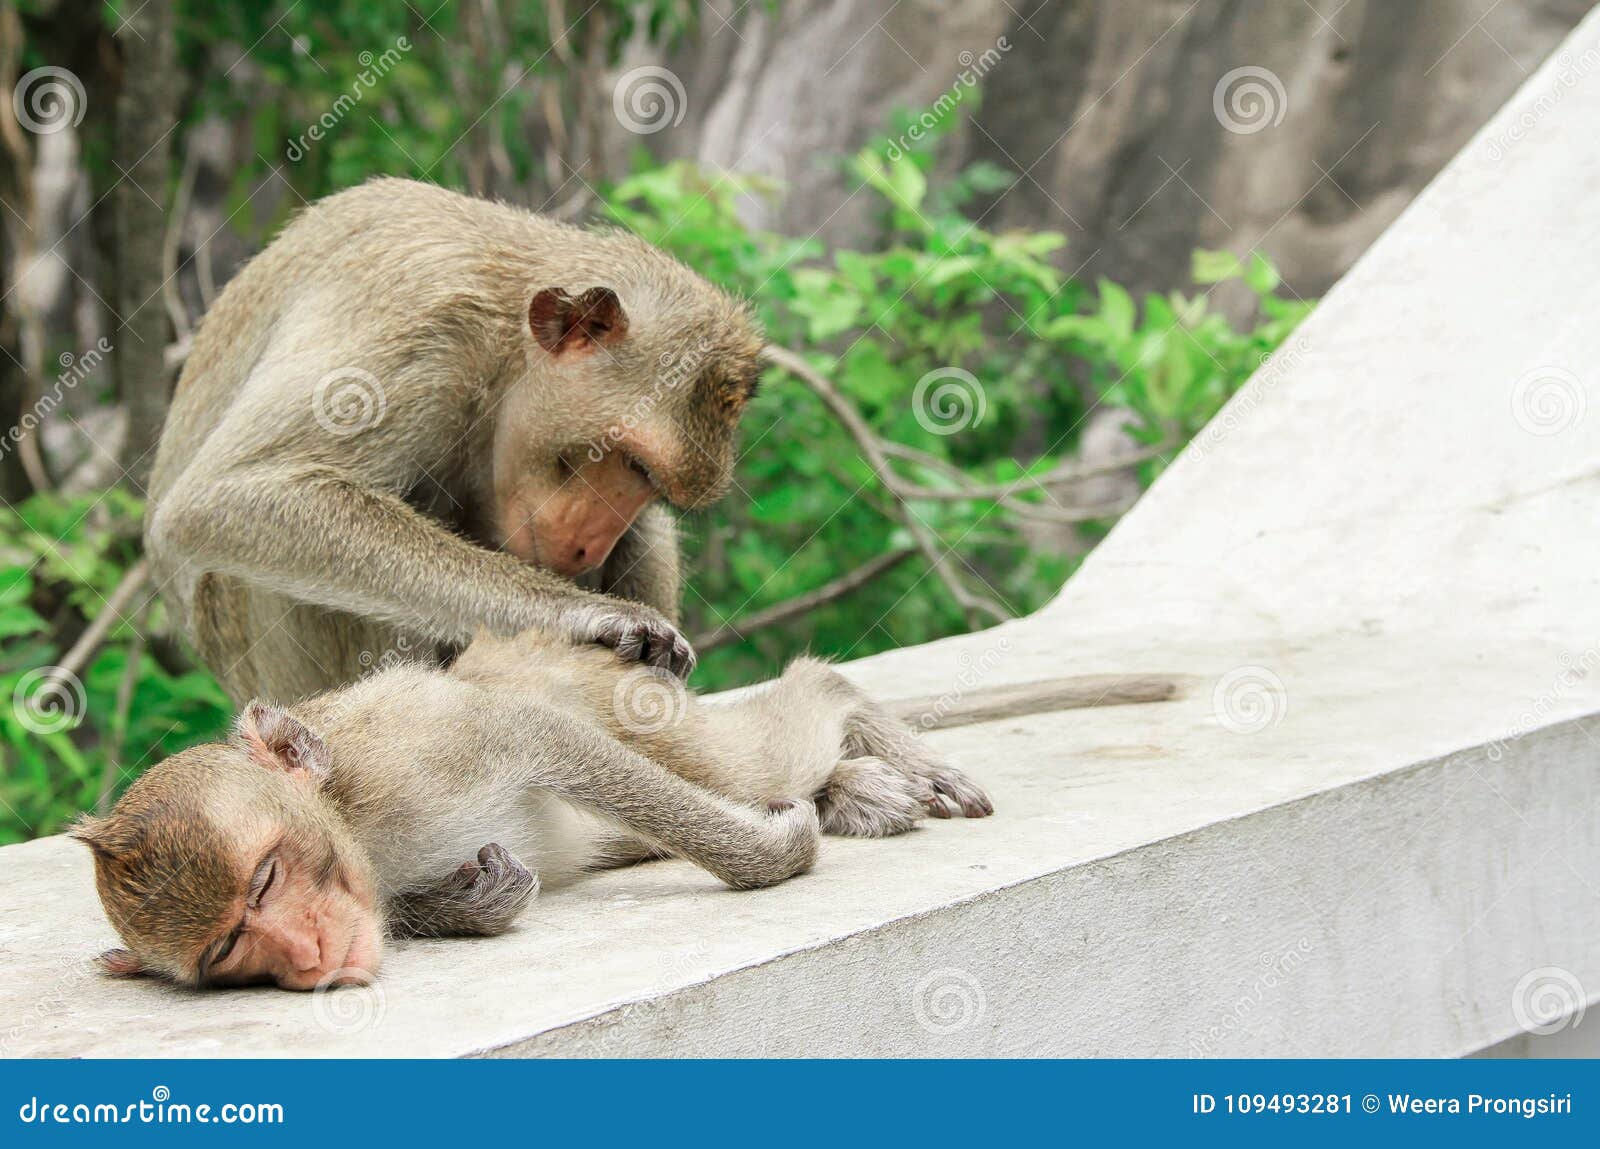 Ape, Monkey, Squirrel Monkey, Tropical Rainforest, Animal Stock Image -  Image of cute, macaque: 109493281